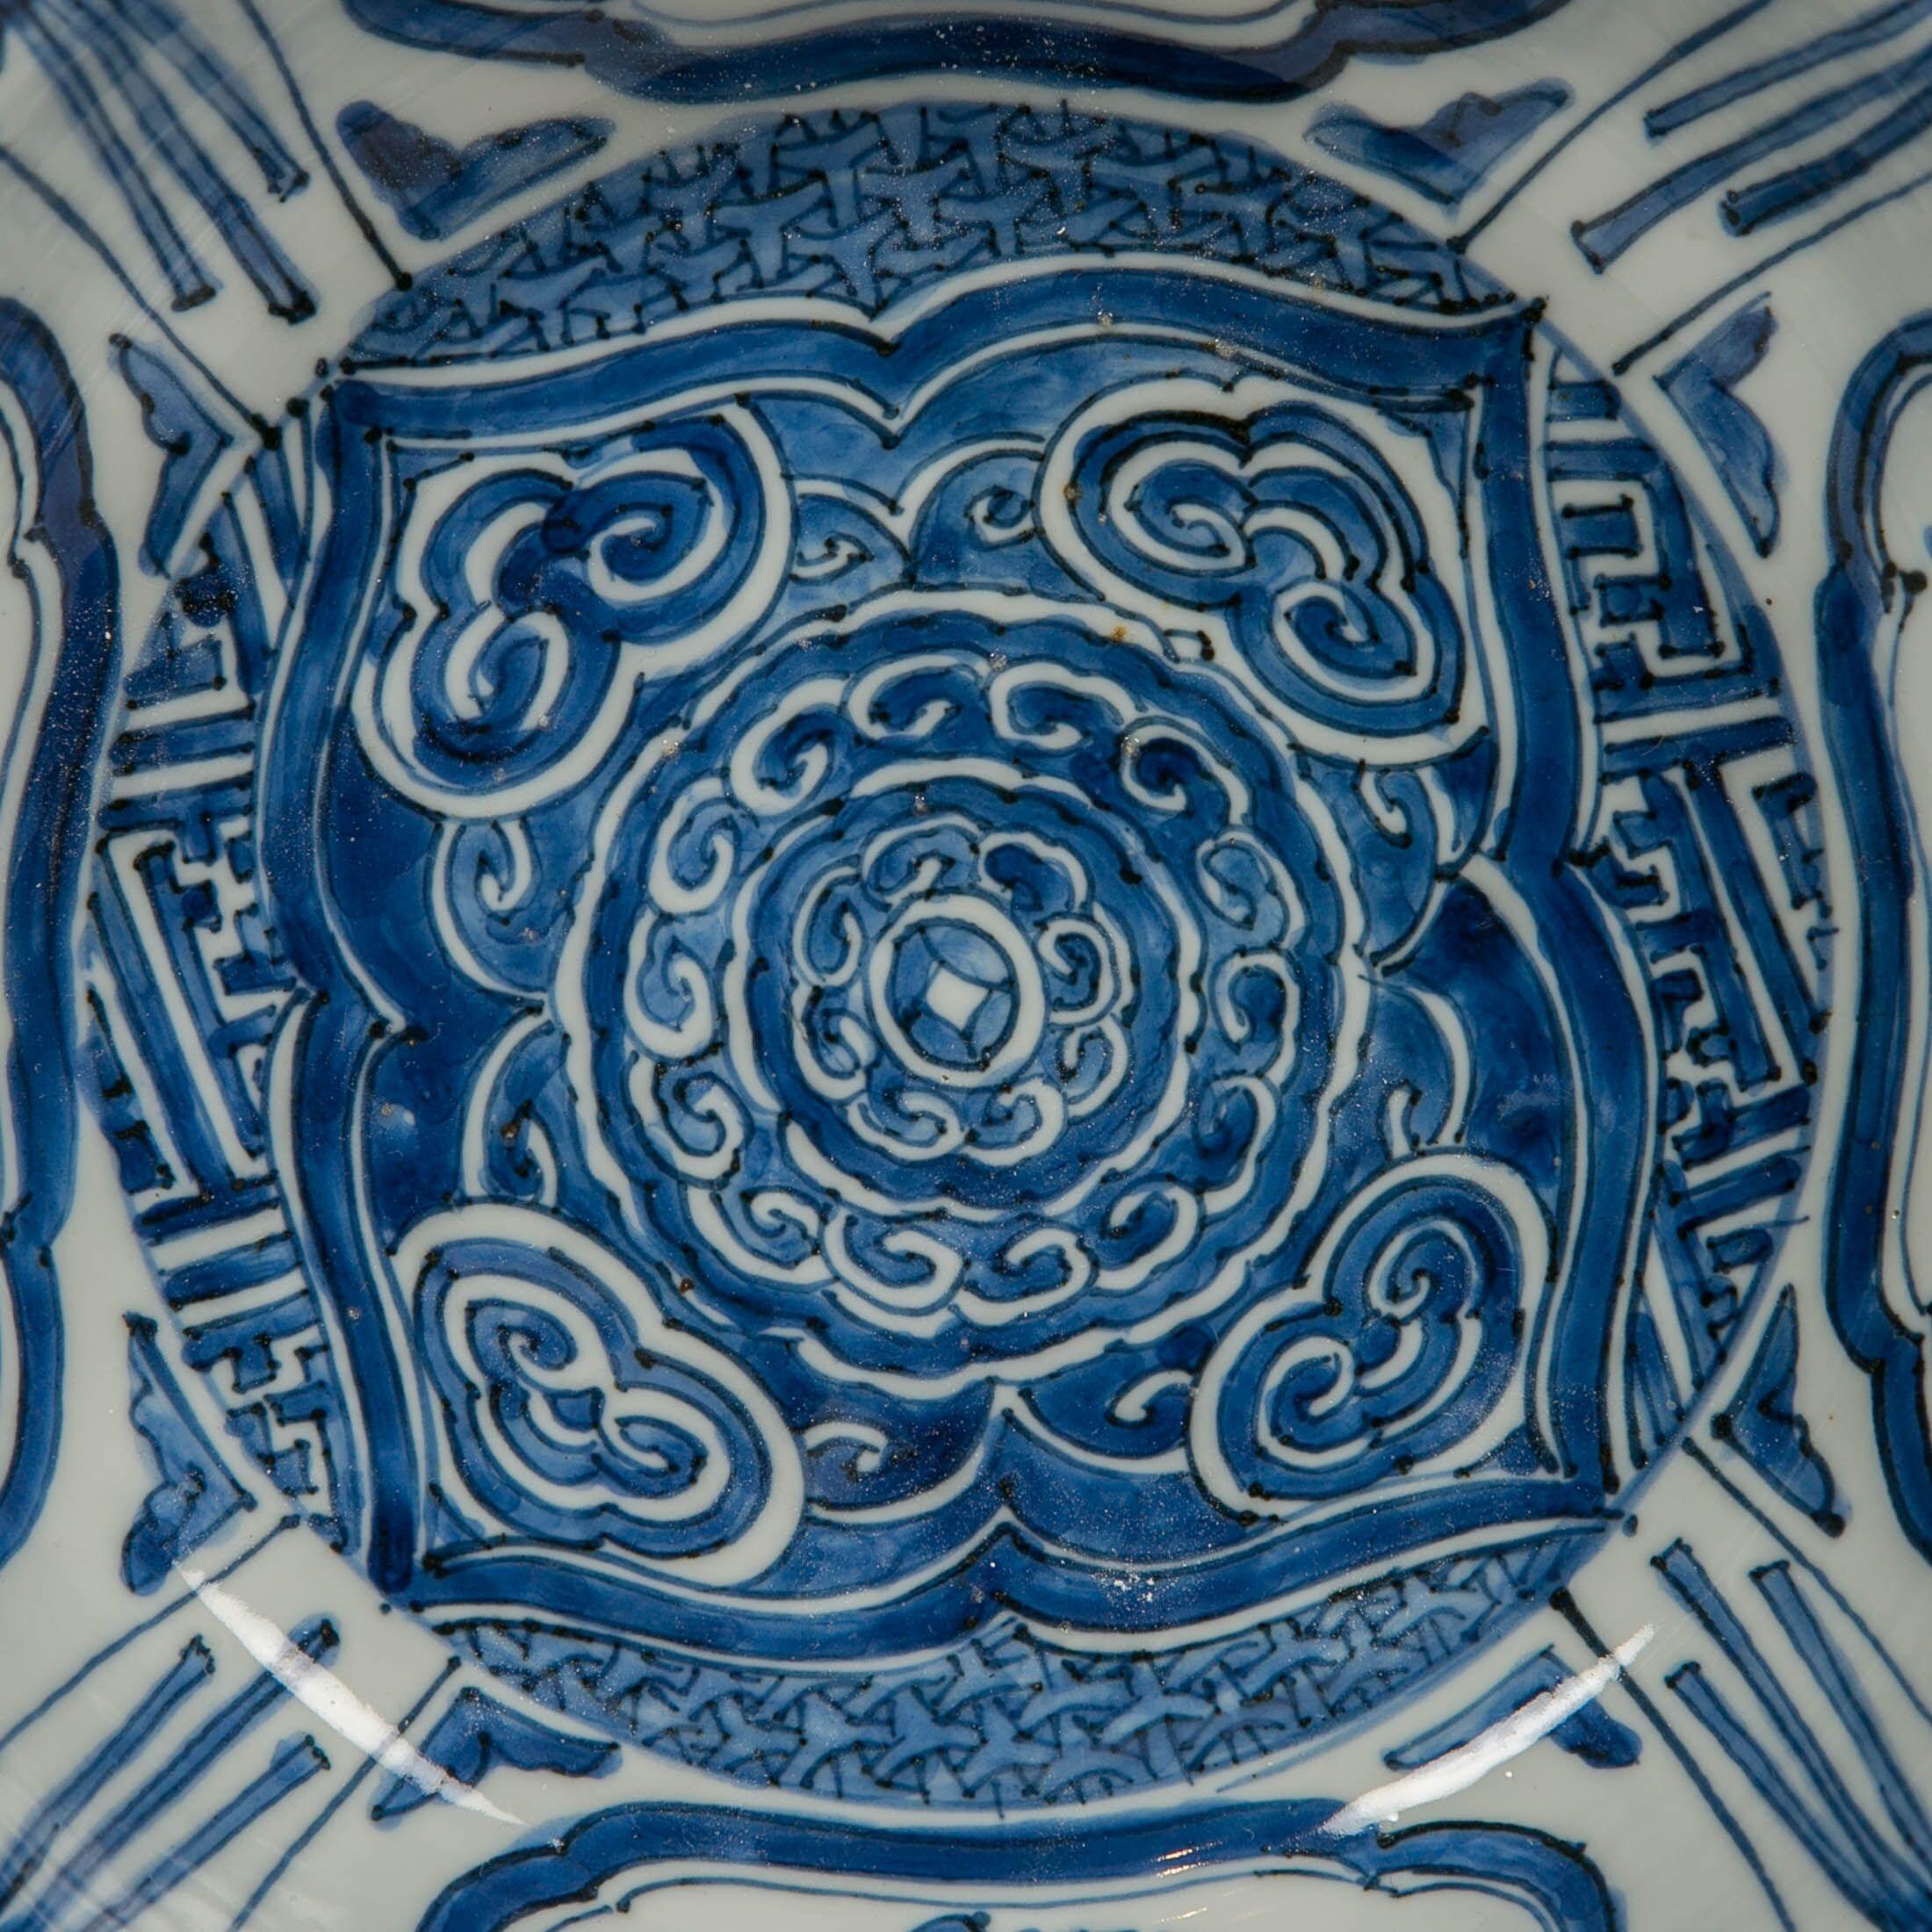 Why We Love It: The blue and white design is hypnotic.
We are pleased to offer this 17th-century blue and white Chinese Klapmuts bowl made circa 1640. It is beautifully hand-painted in the Kraak style. Our bowl has traditional Klapmuts decoration: